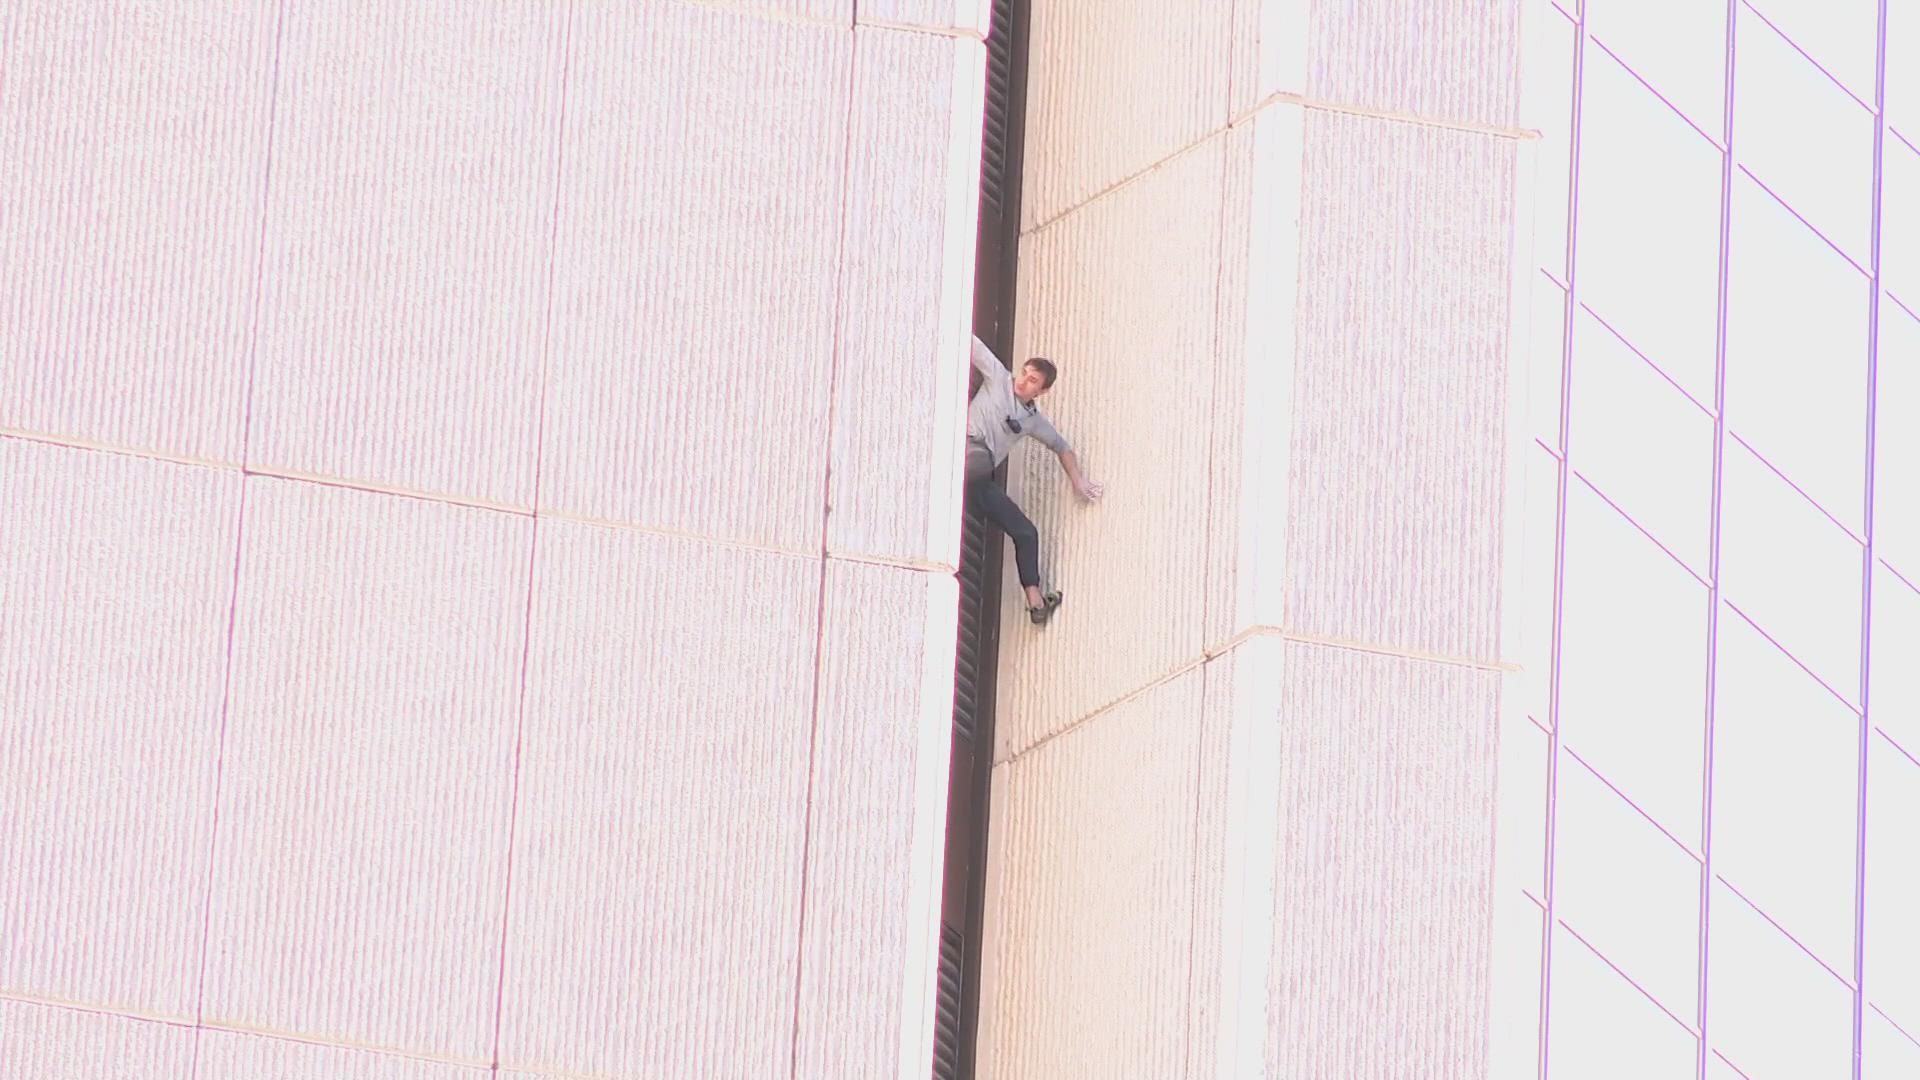 The protestor, known online as Pro-life Spiderman, was seen climbing the building early Tuesday morning. Here's some initial info after the incident.